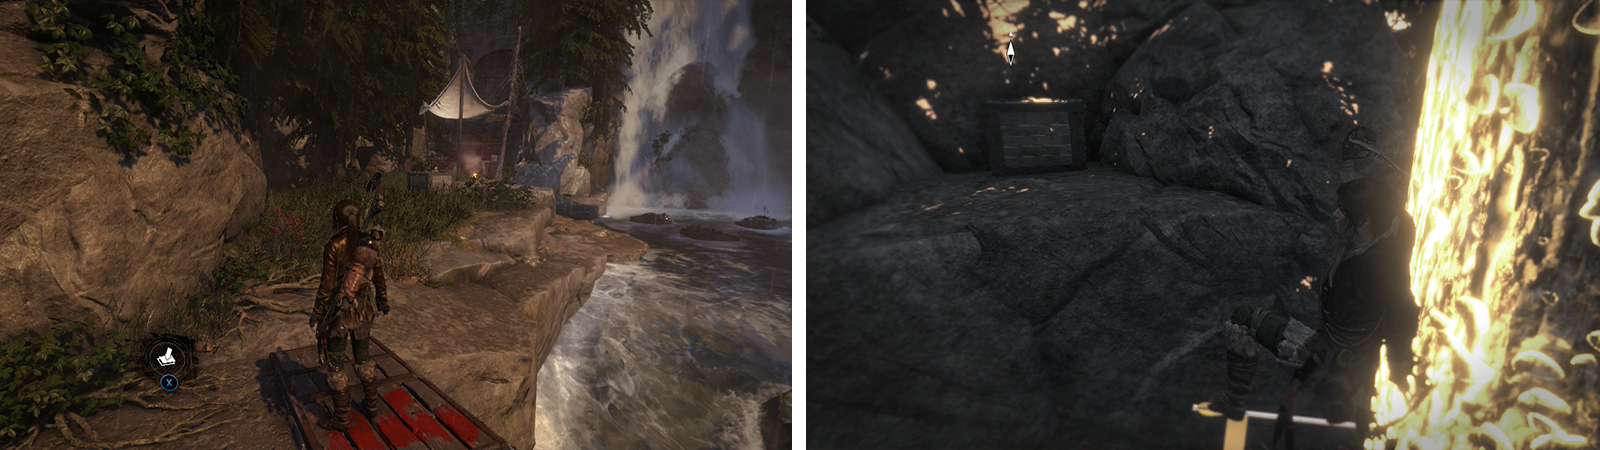 Dive from the platform by the Base Camp (left). Use the weak wood on the tree by the cave entrance to climb it using broadhead arrows (right) - hop to the nearby platform for Document 33.